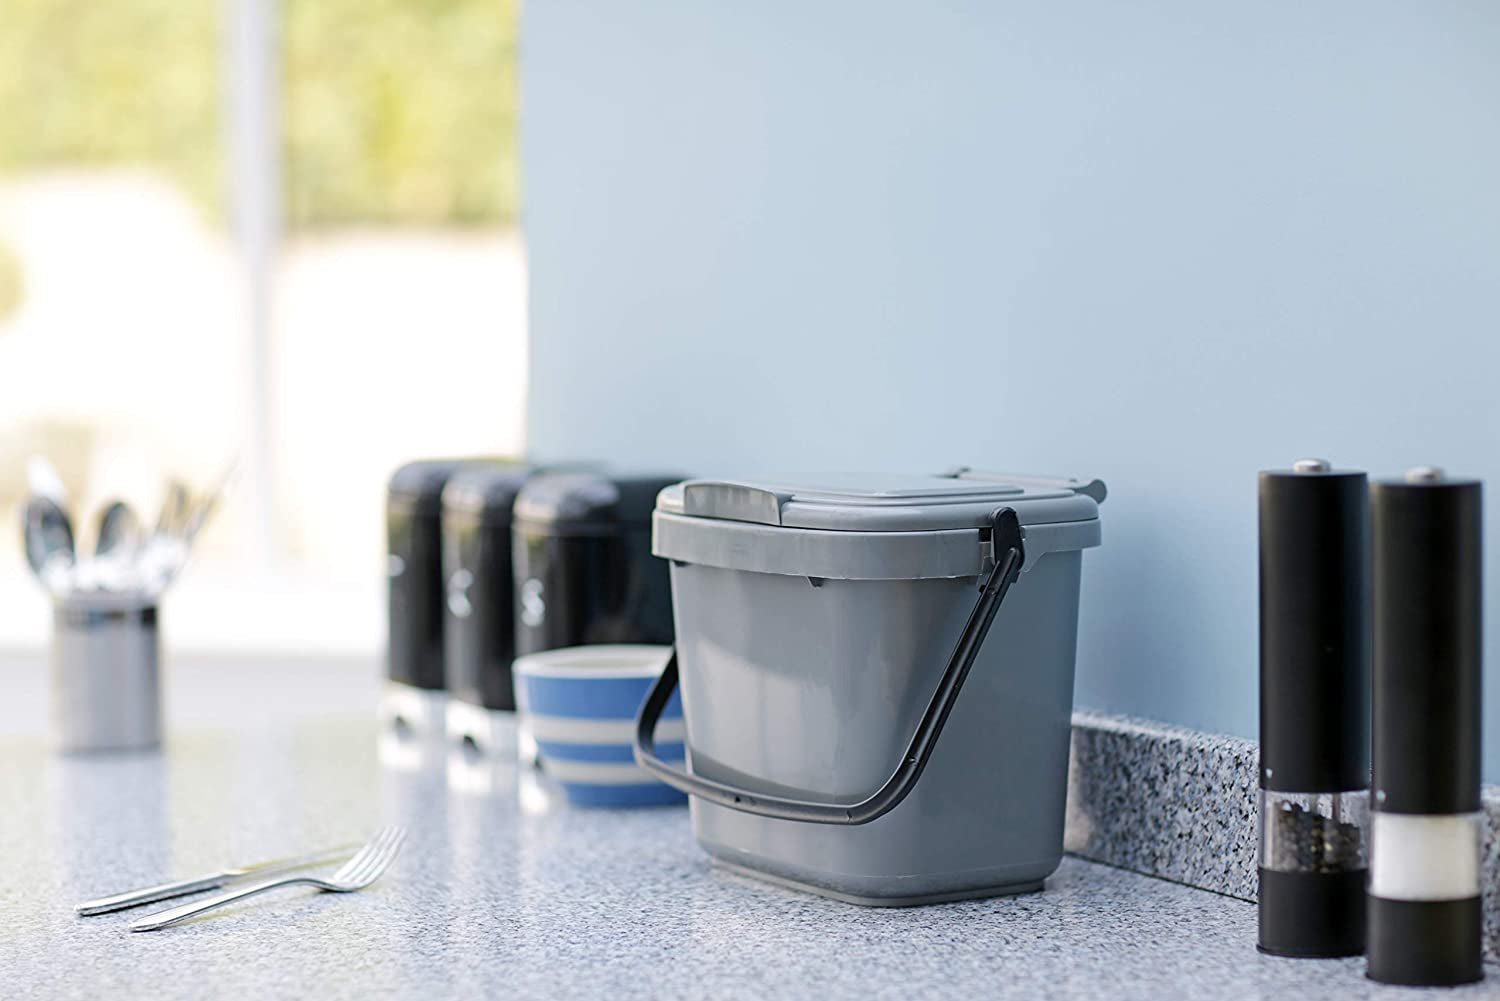 Silver Grey Kitchen Compost Caddy (5L - Small) - for Food Waste Recycling (5 Litre) - 5L Plastic Composting Bin